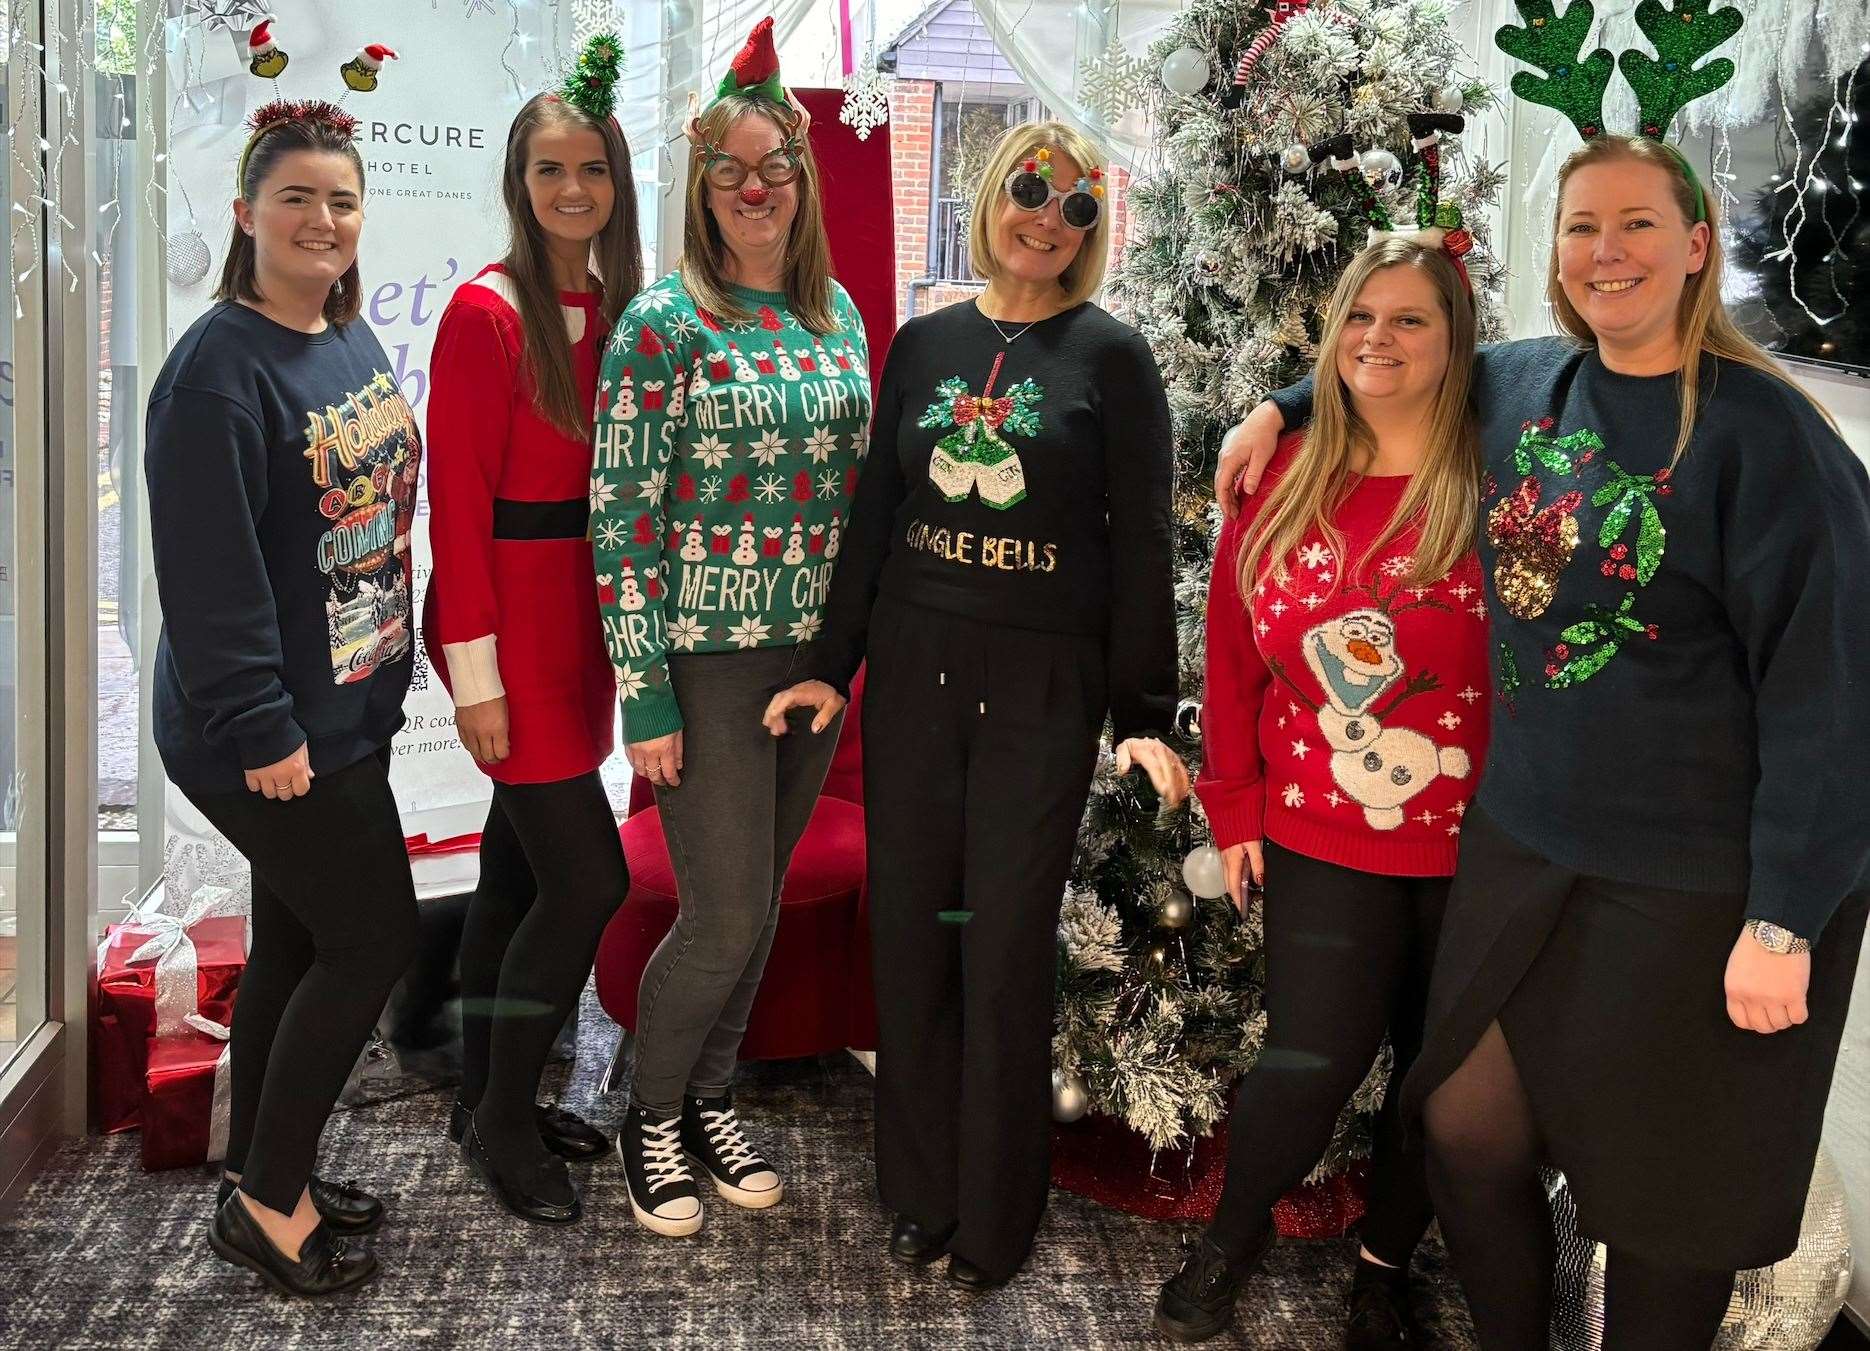 Mercure Maidstone Event and Sales team in their Christmas Jumpers